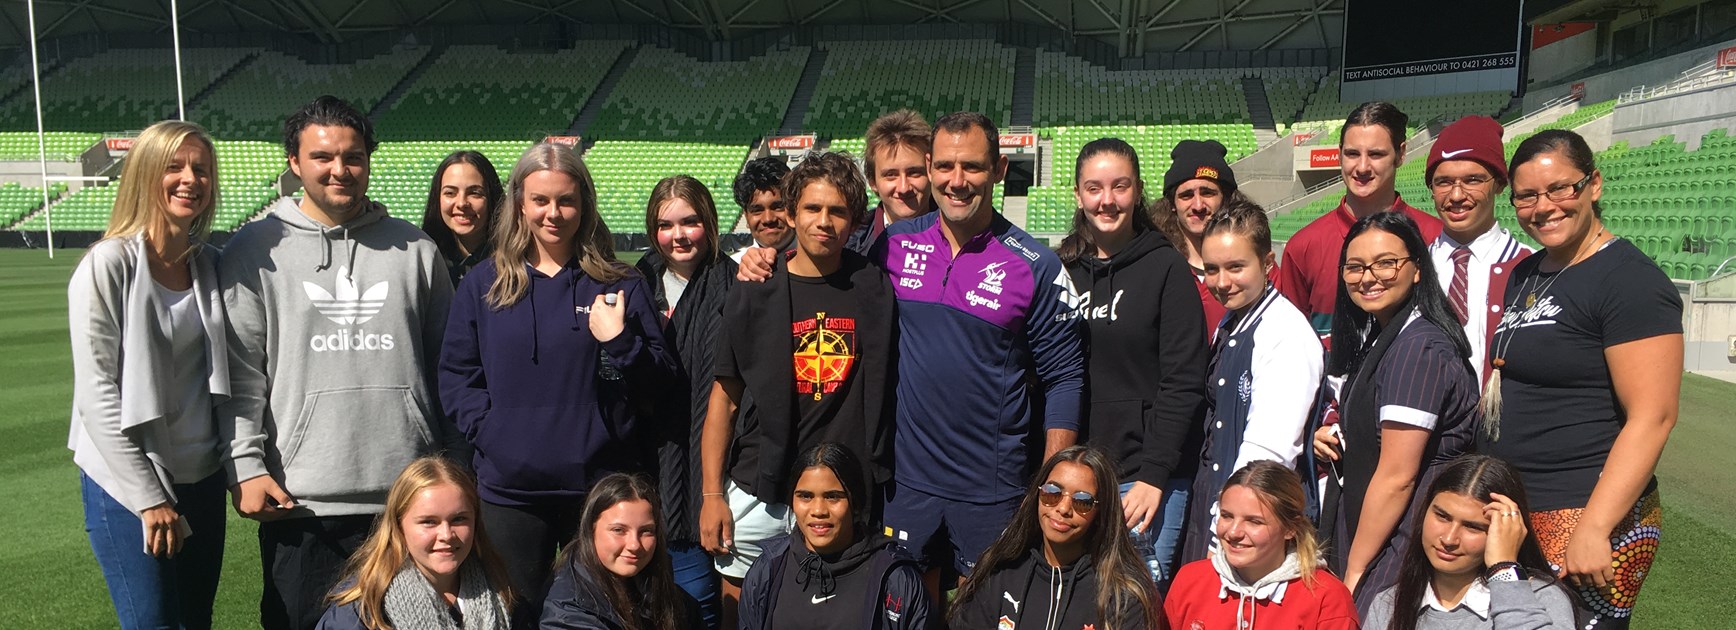 NRL School to Work program offers support during trying time